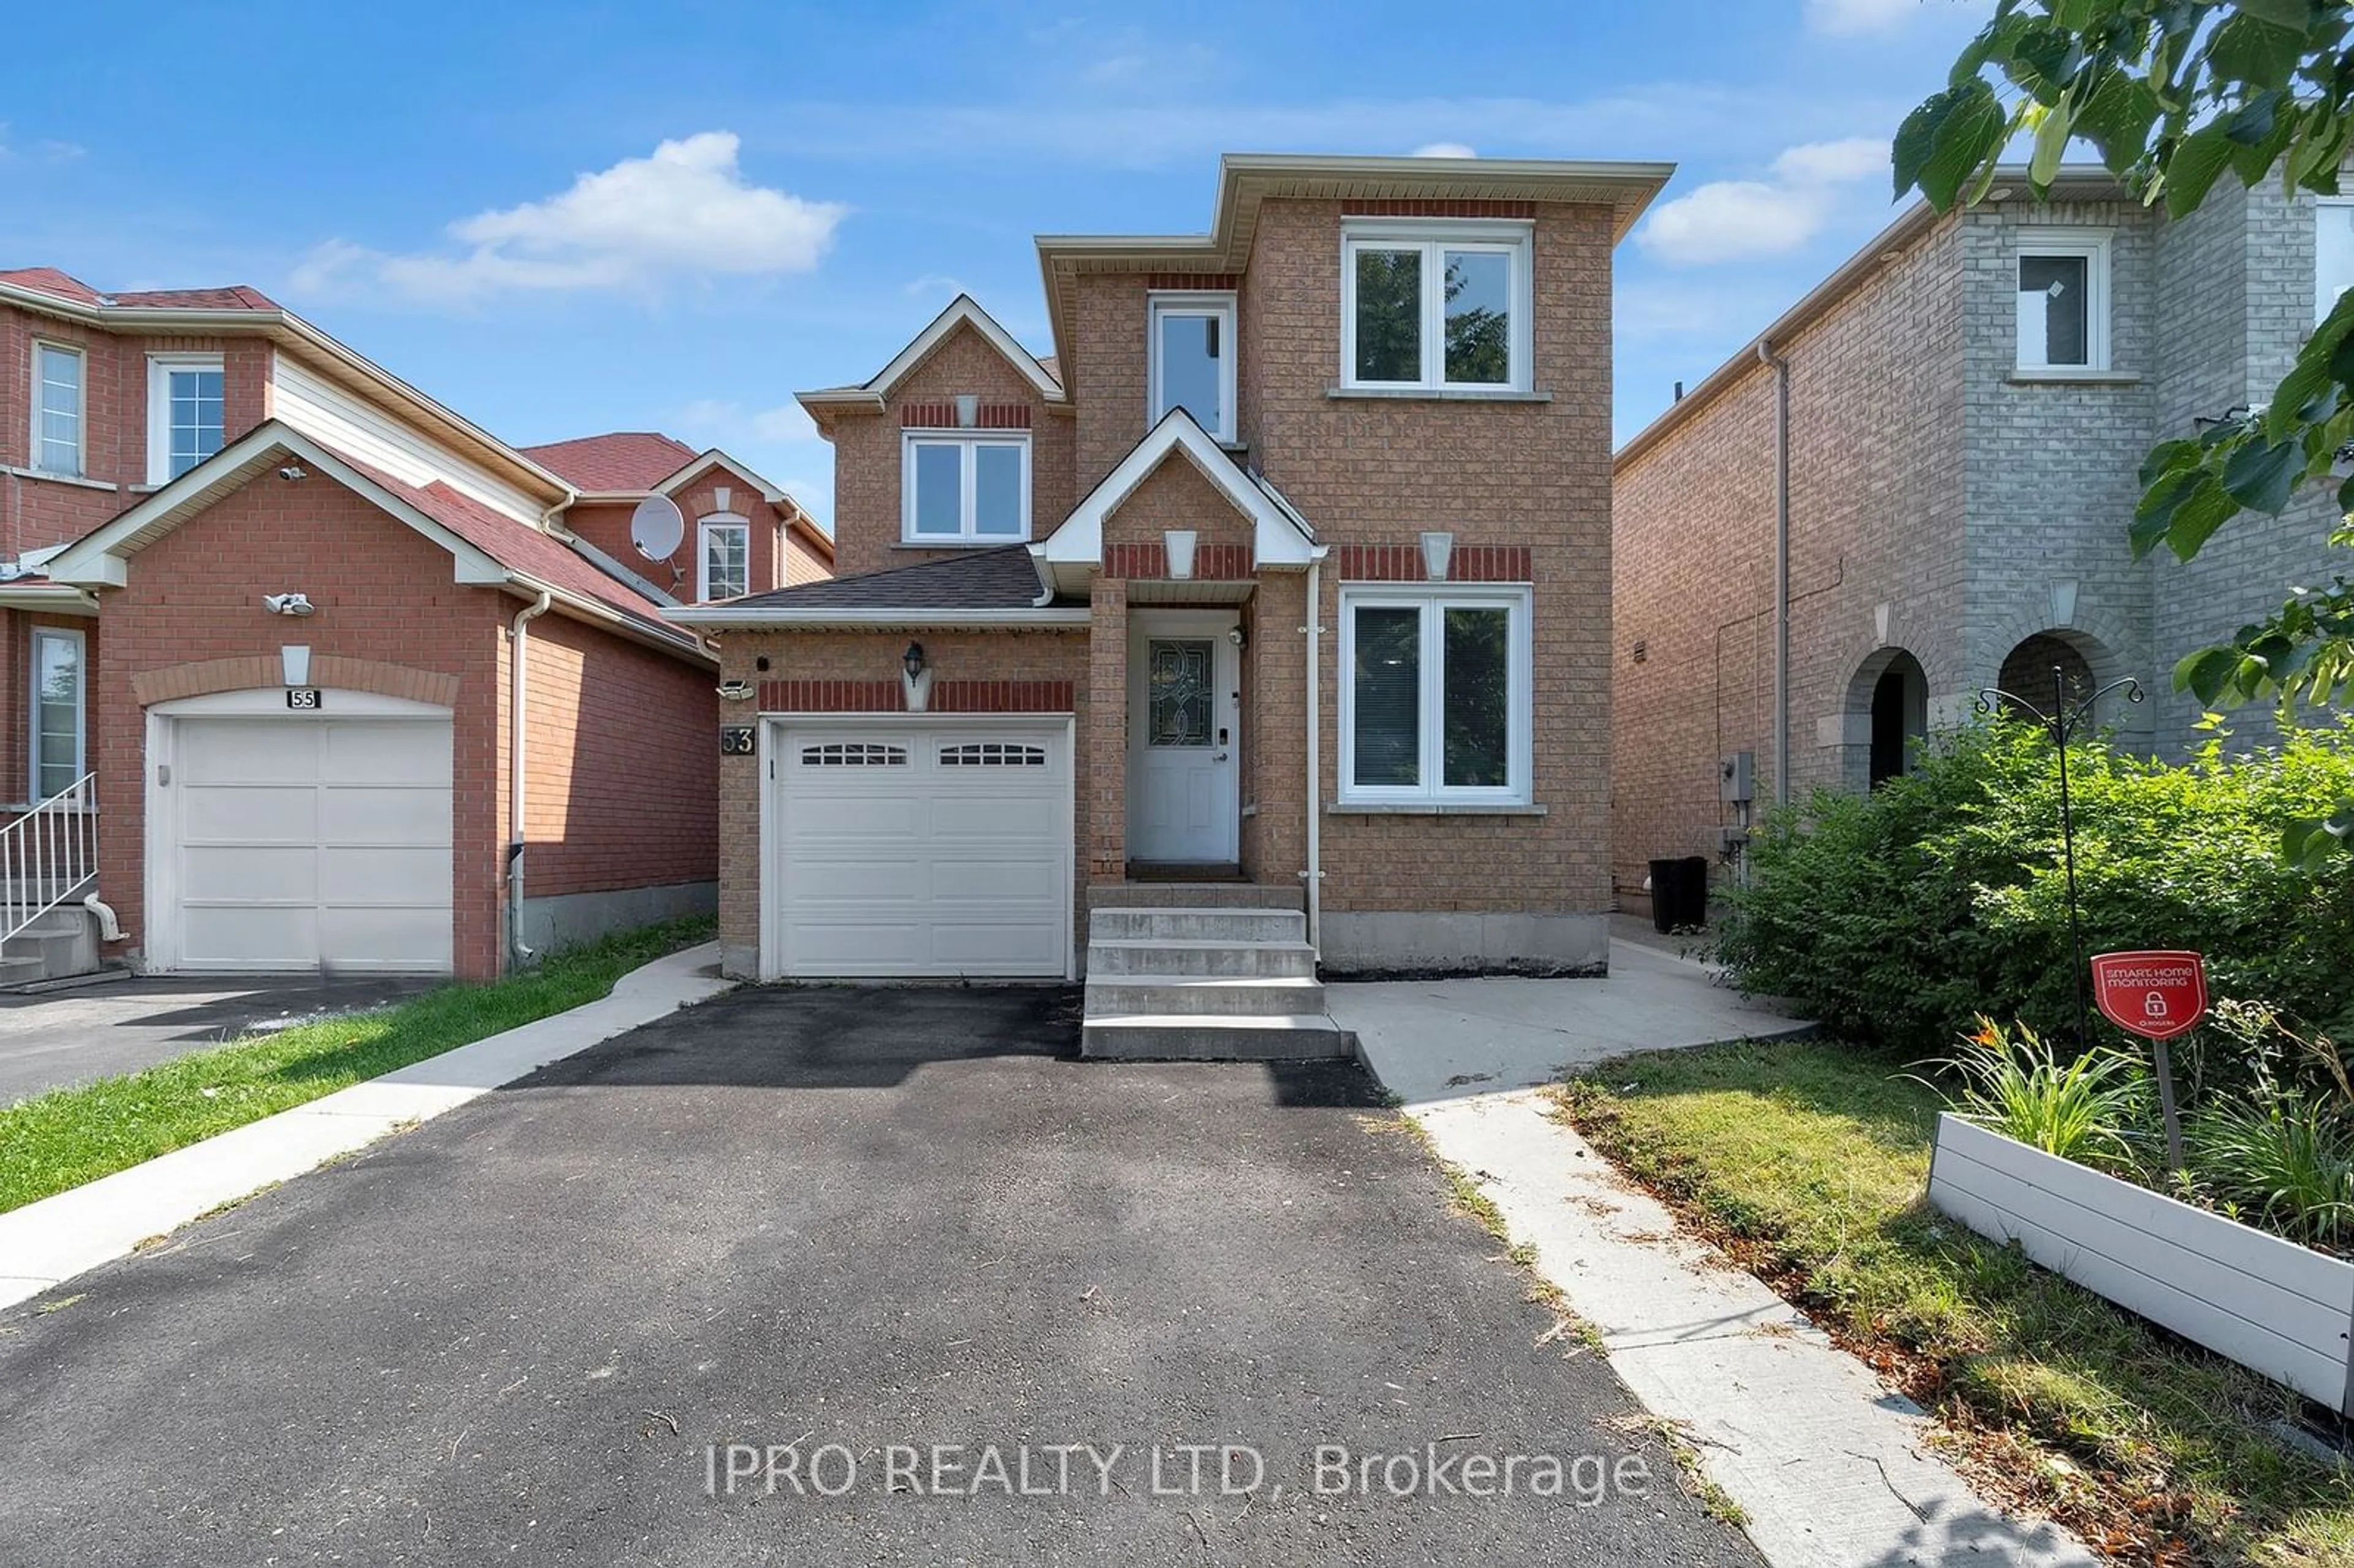 Frontside or backside of a home for 53 Chadwick St, Brampton Ontario L6Y 4Y1